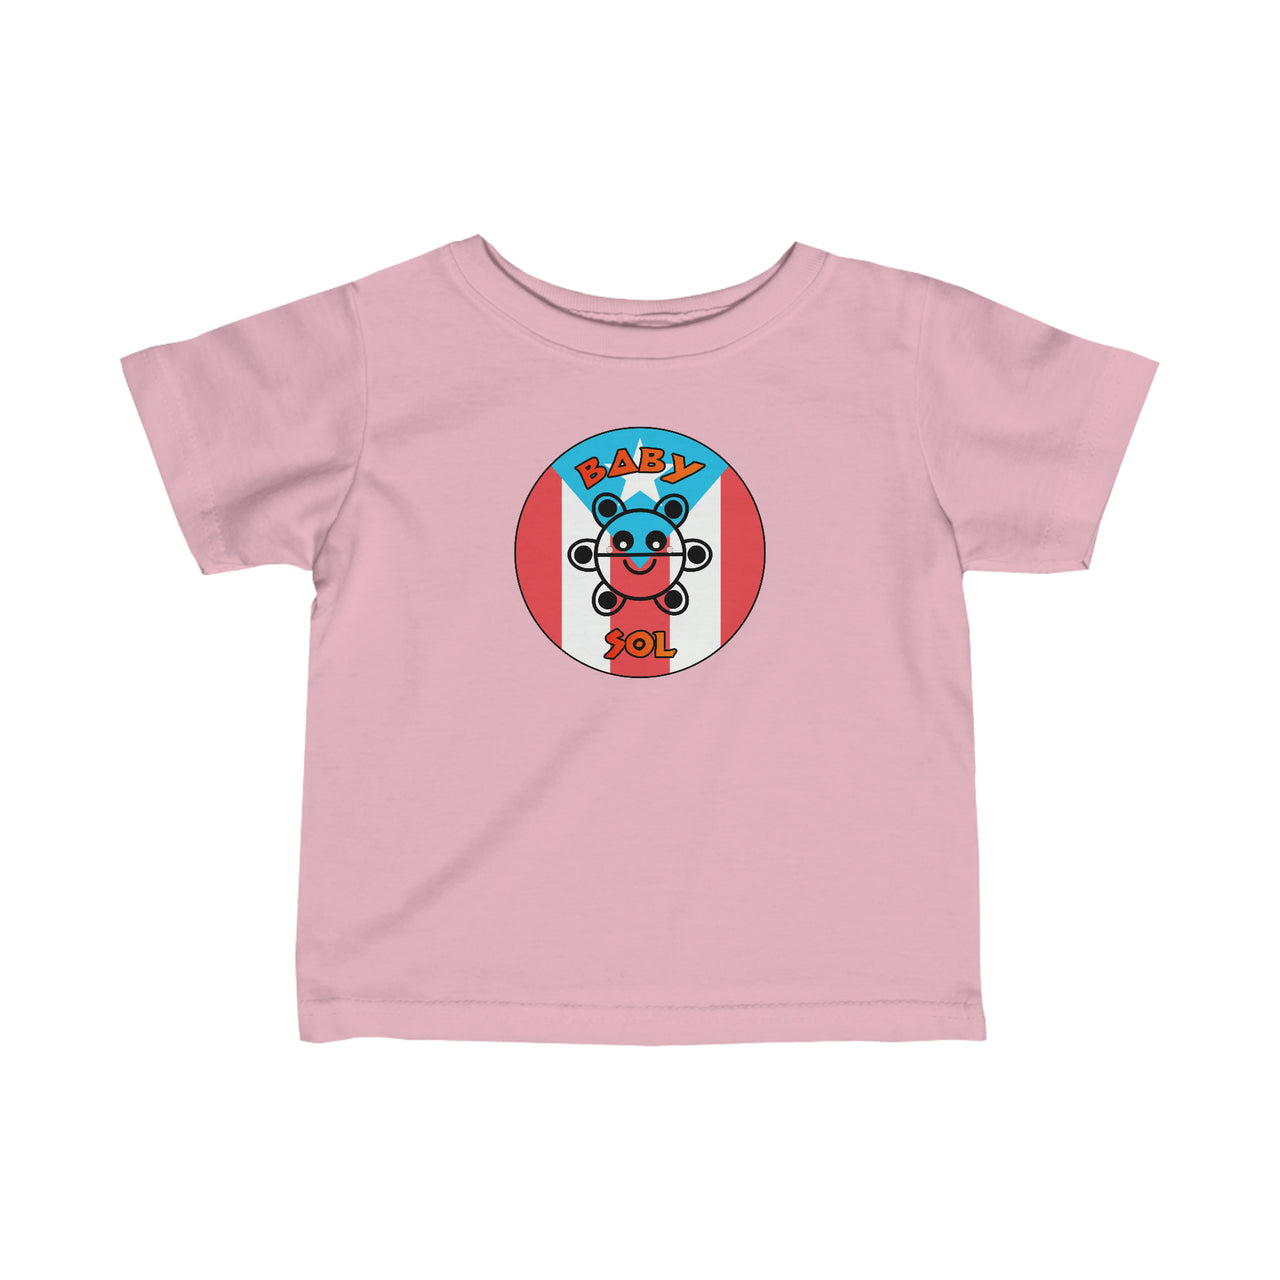 Baby Sol - Infant Fine Jersey Tee